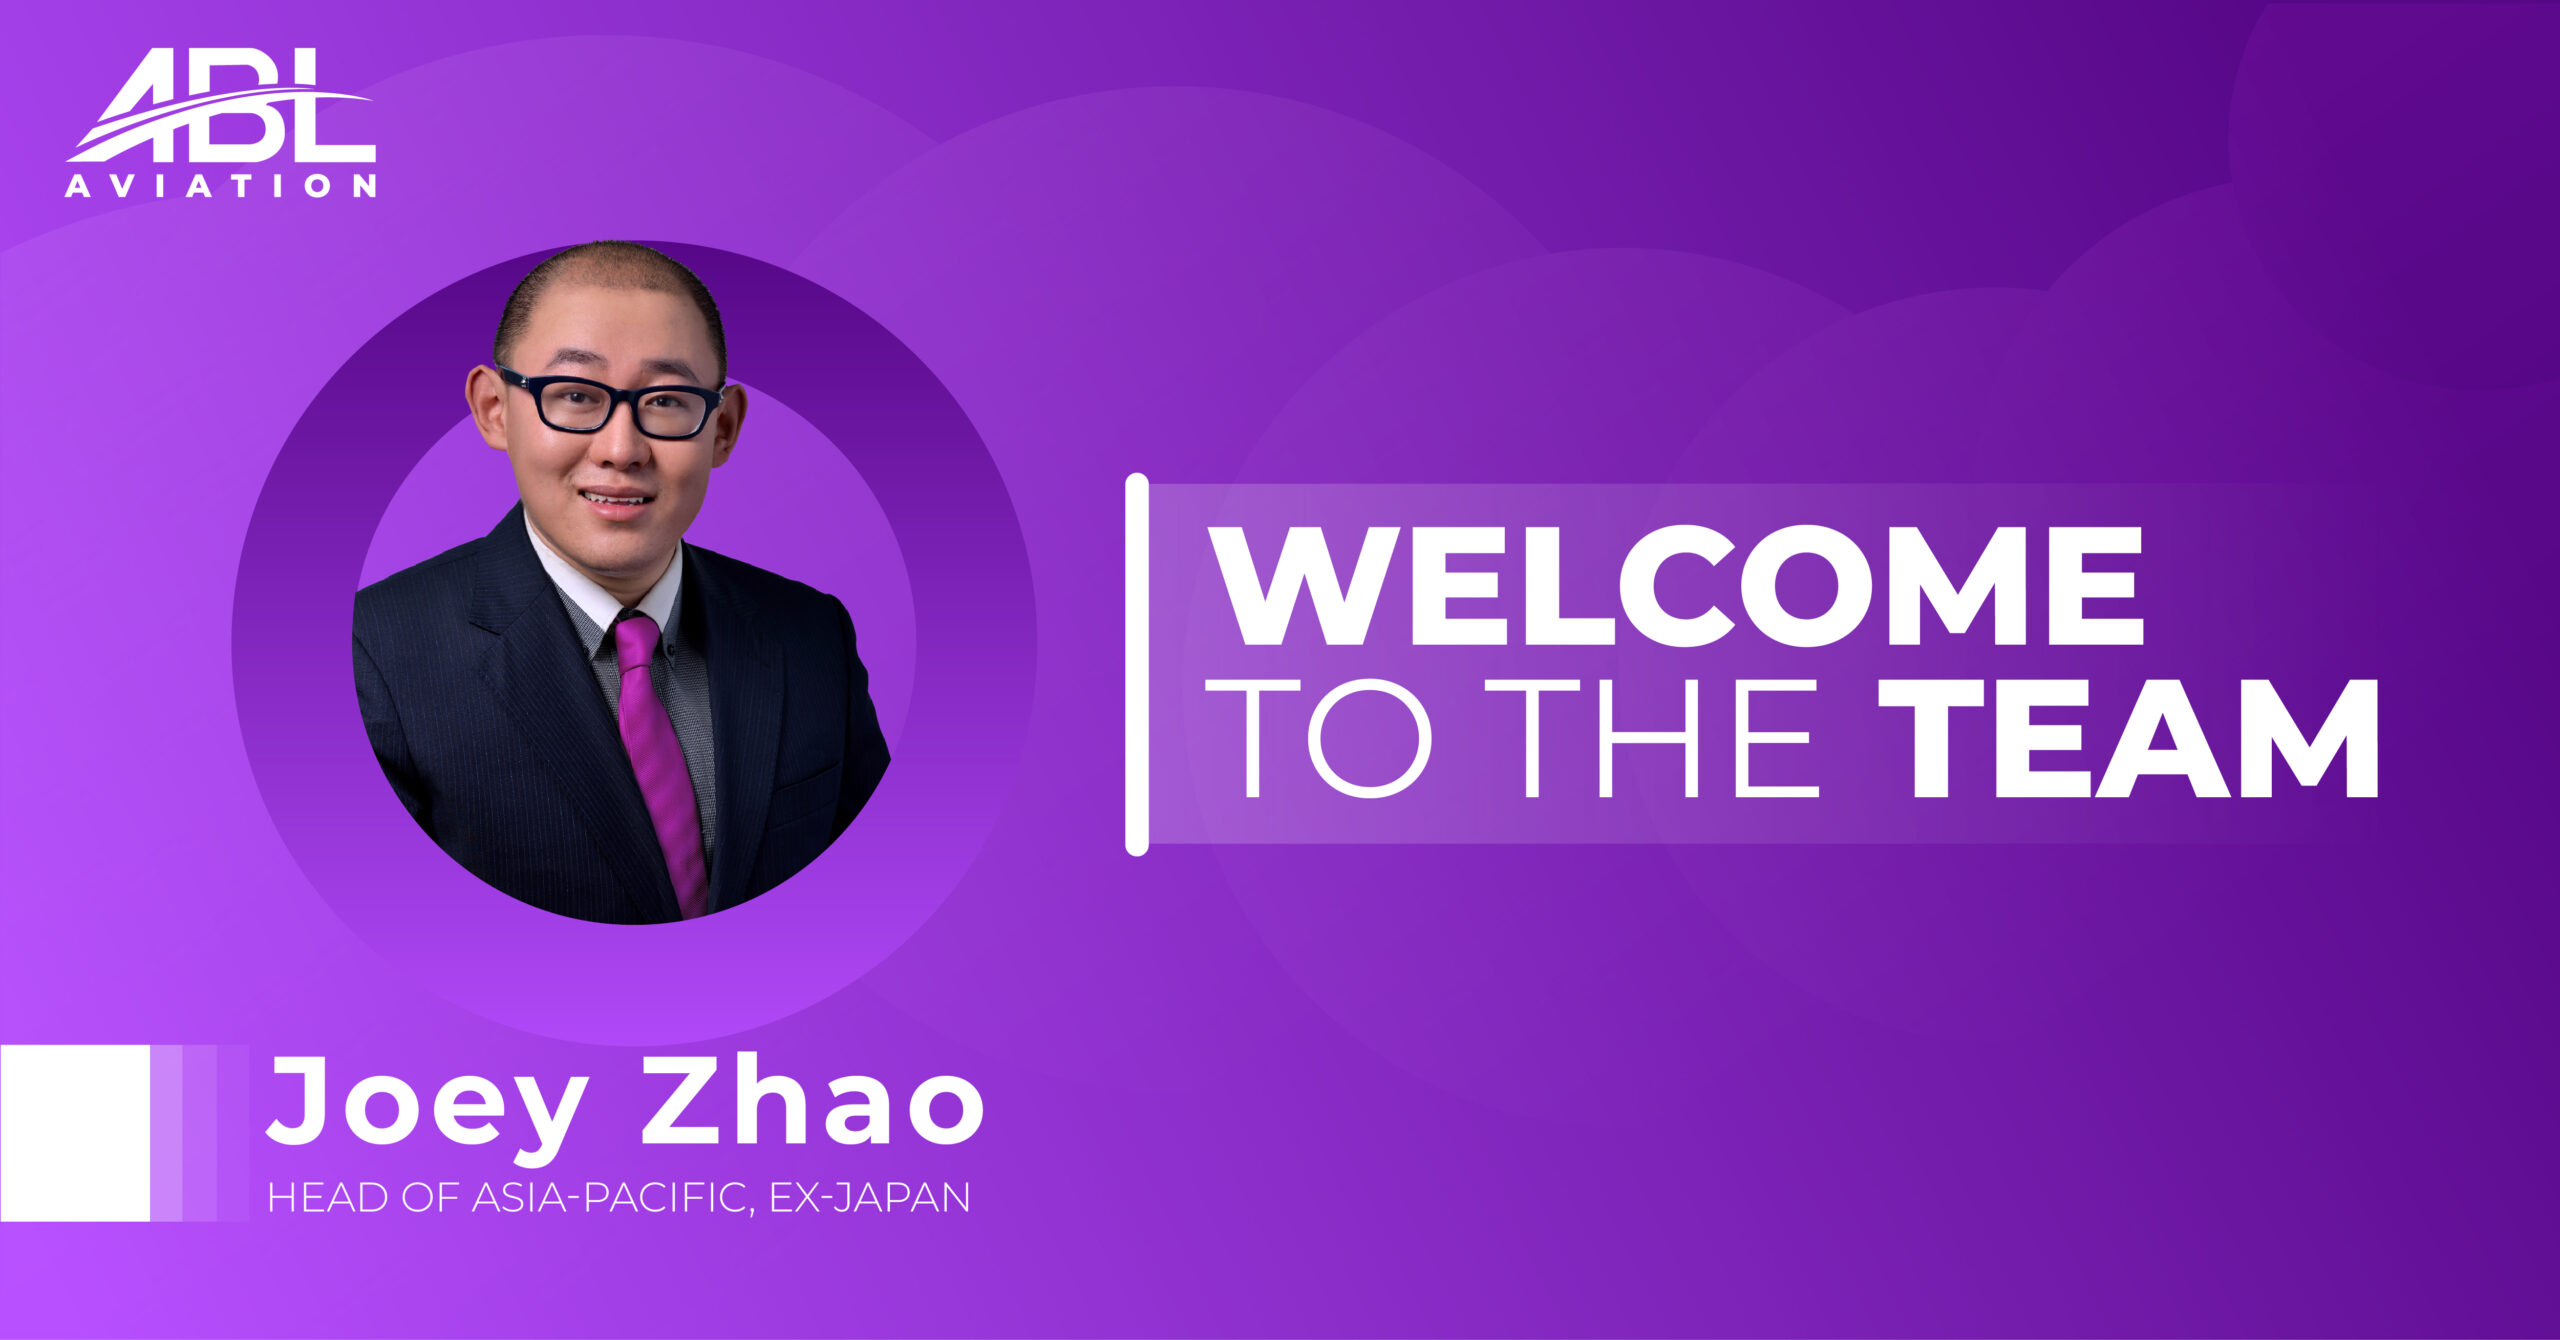 Joey Zhao Has Been Appointed as Head of Asia-Pacific, Ex-Japan in ABL Aviation’s Hong Kong Office